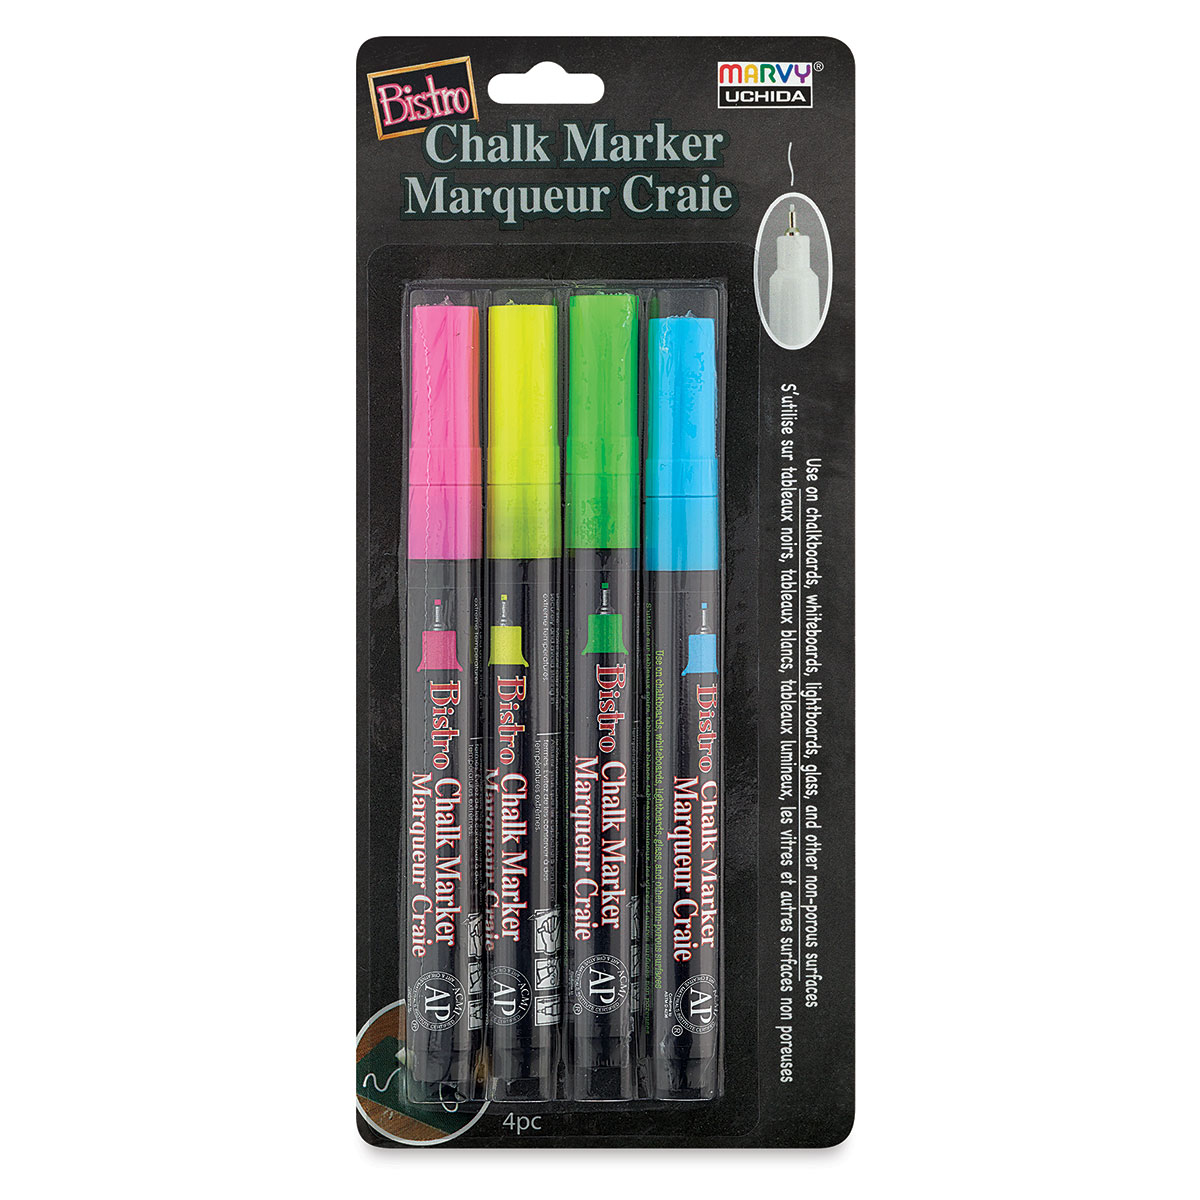 Crafts 4 All Liquid Chalk Markers For Blackboard Signs, Bistro Menu, Car  Window Glass - Dry Erase, Washable - 13 Colored Chalk Pens w/Reversible  Tips